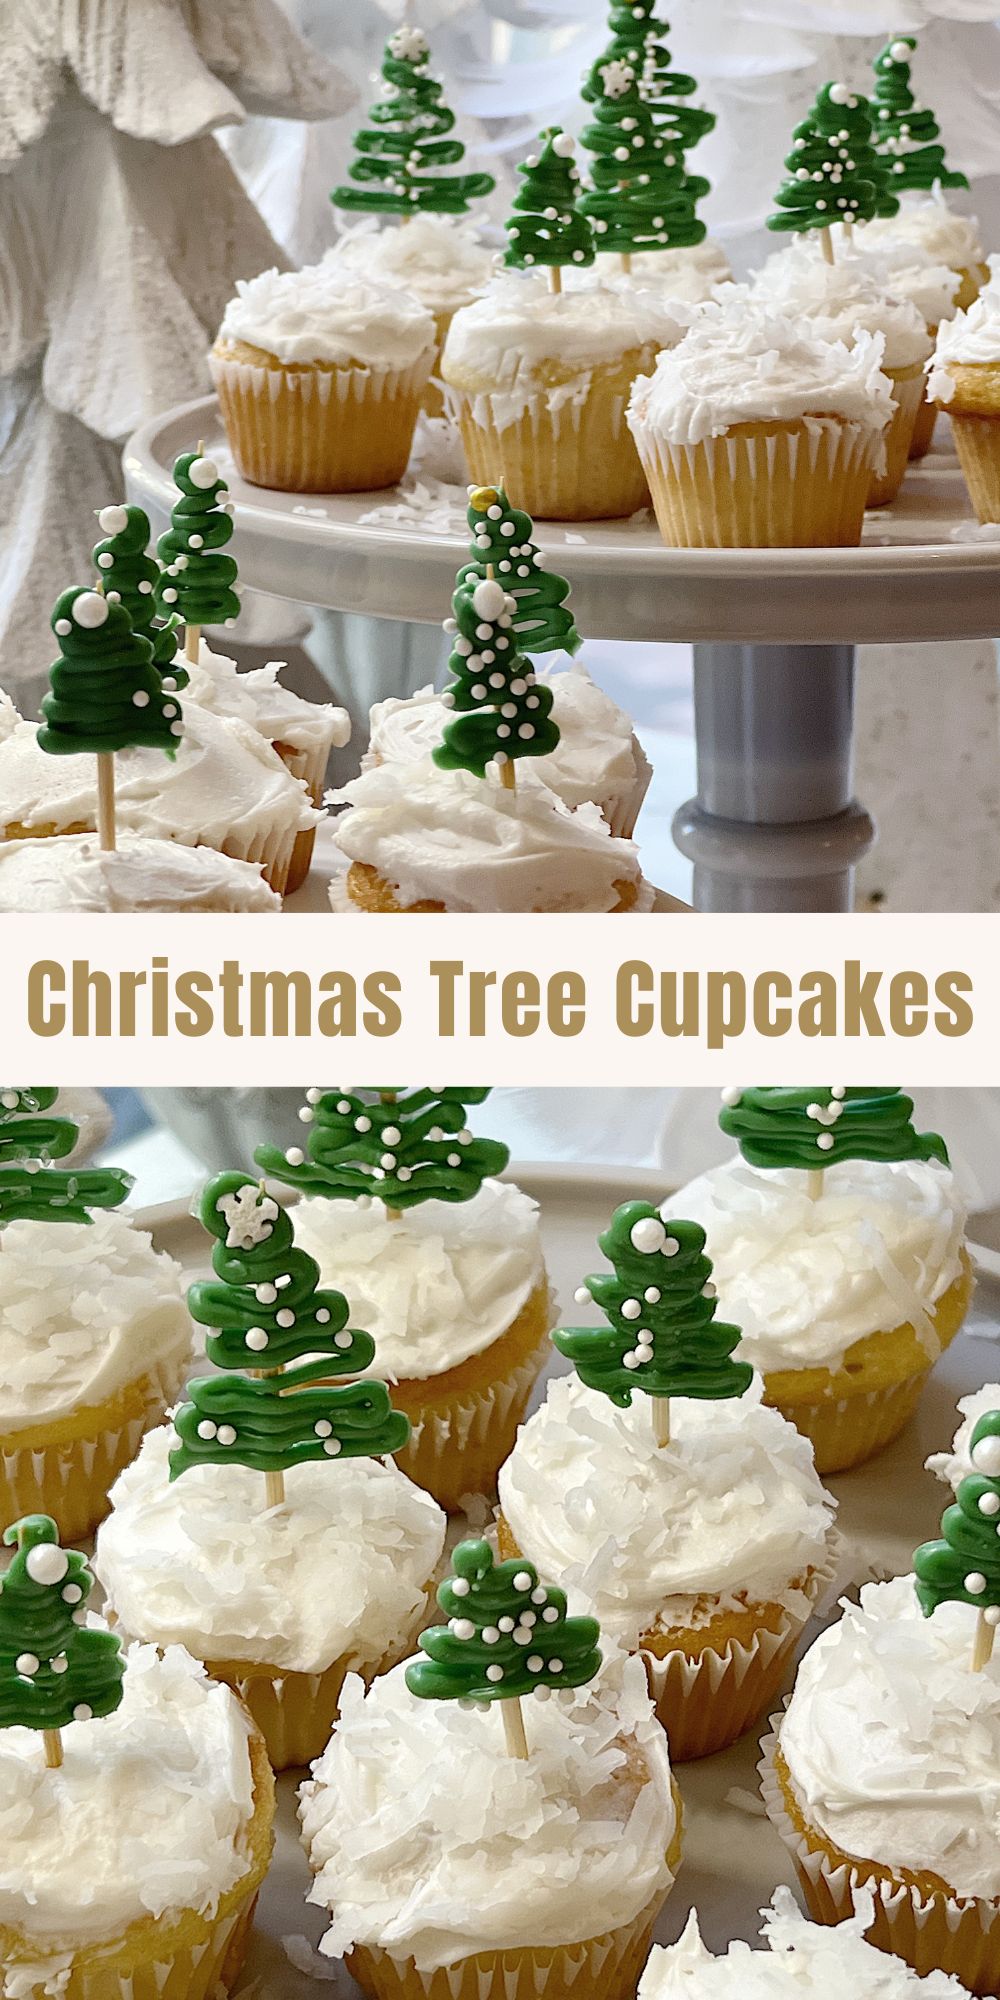 I have been cooking for our Christmas party and I wanted to add a new fun dessert. These Christmas tree cupcakes are the cutest dessert ever!